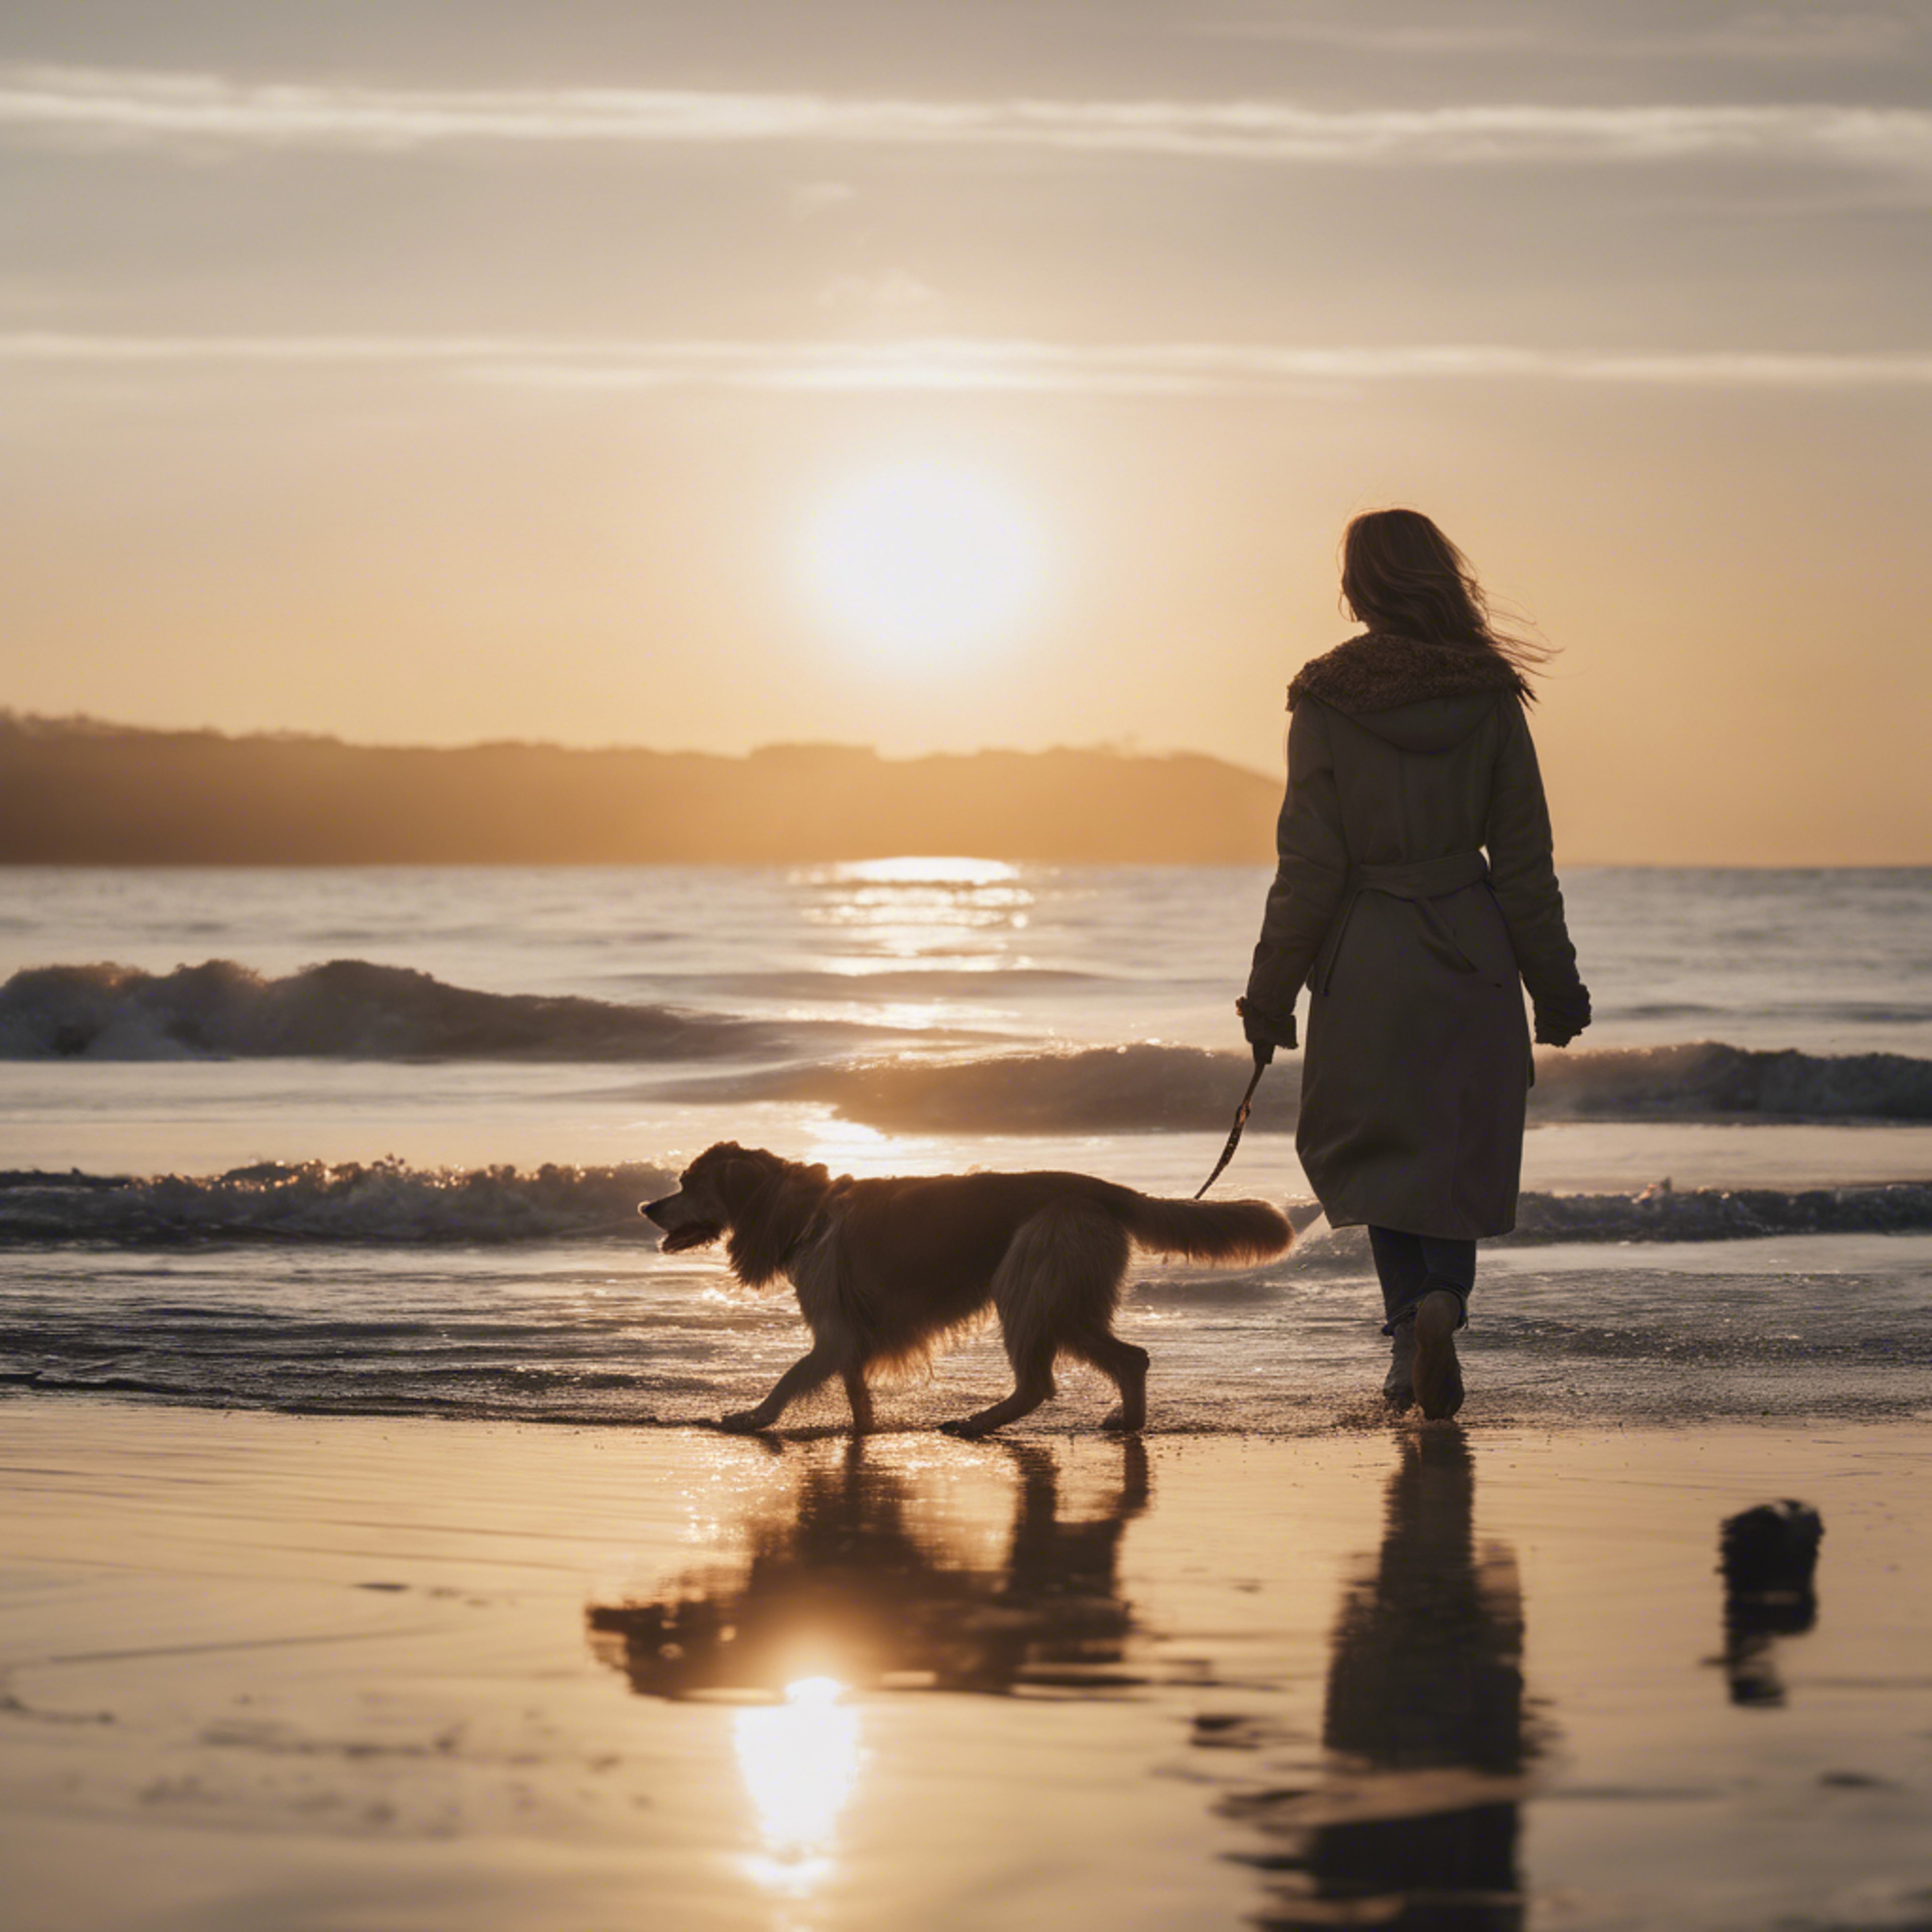 A beach scene with a woman walking her enthusiastic dog along the water's edge at sunset. Tapetai[f9bc2ab3990f4caba062]